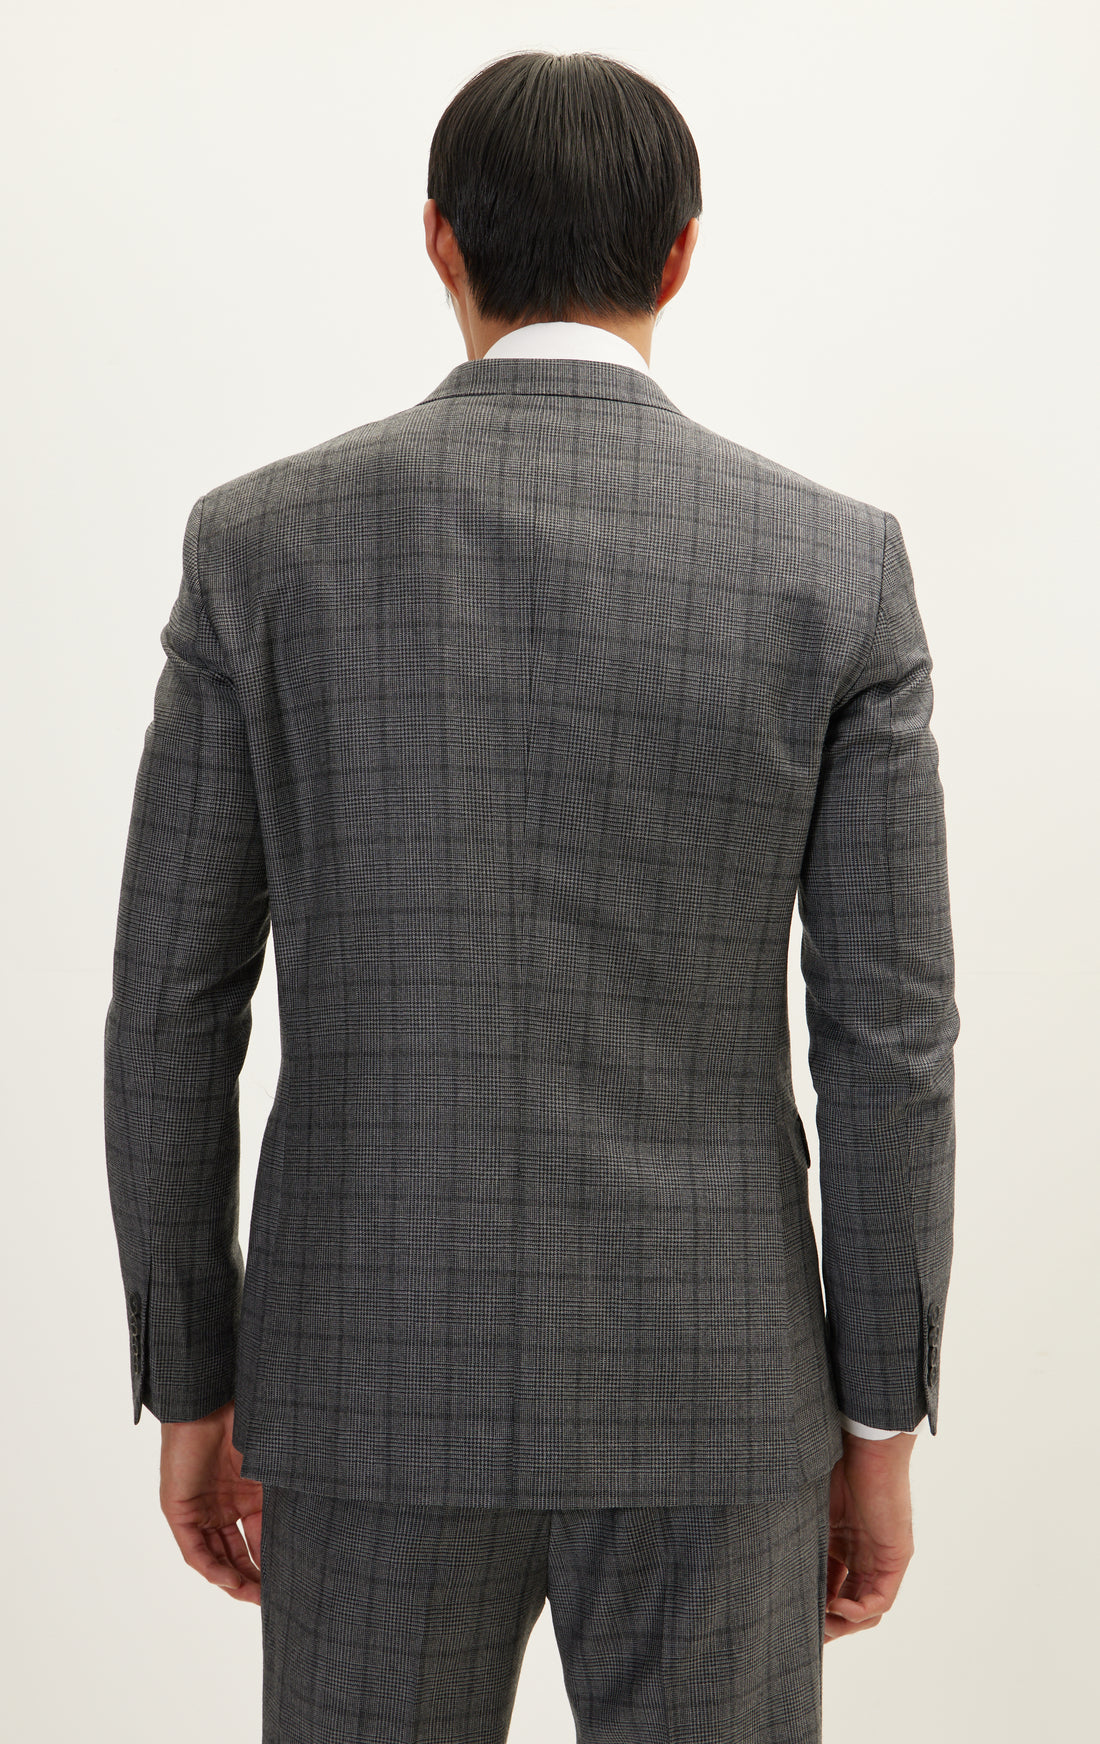 Merino Wool Double Breasted Suit - Charcoal Plaid